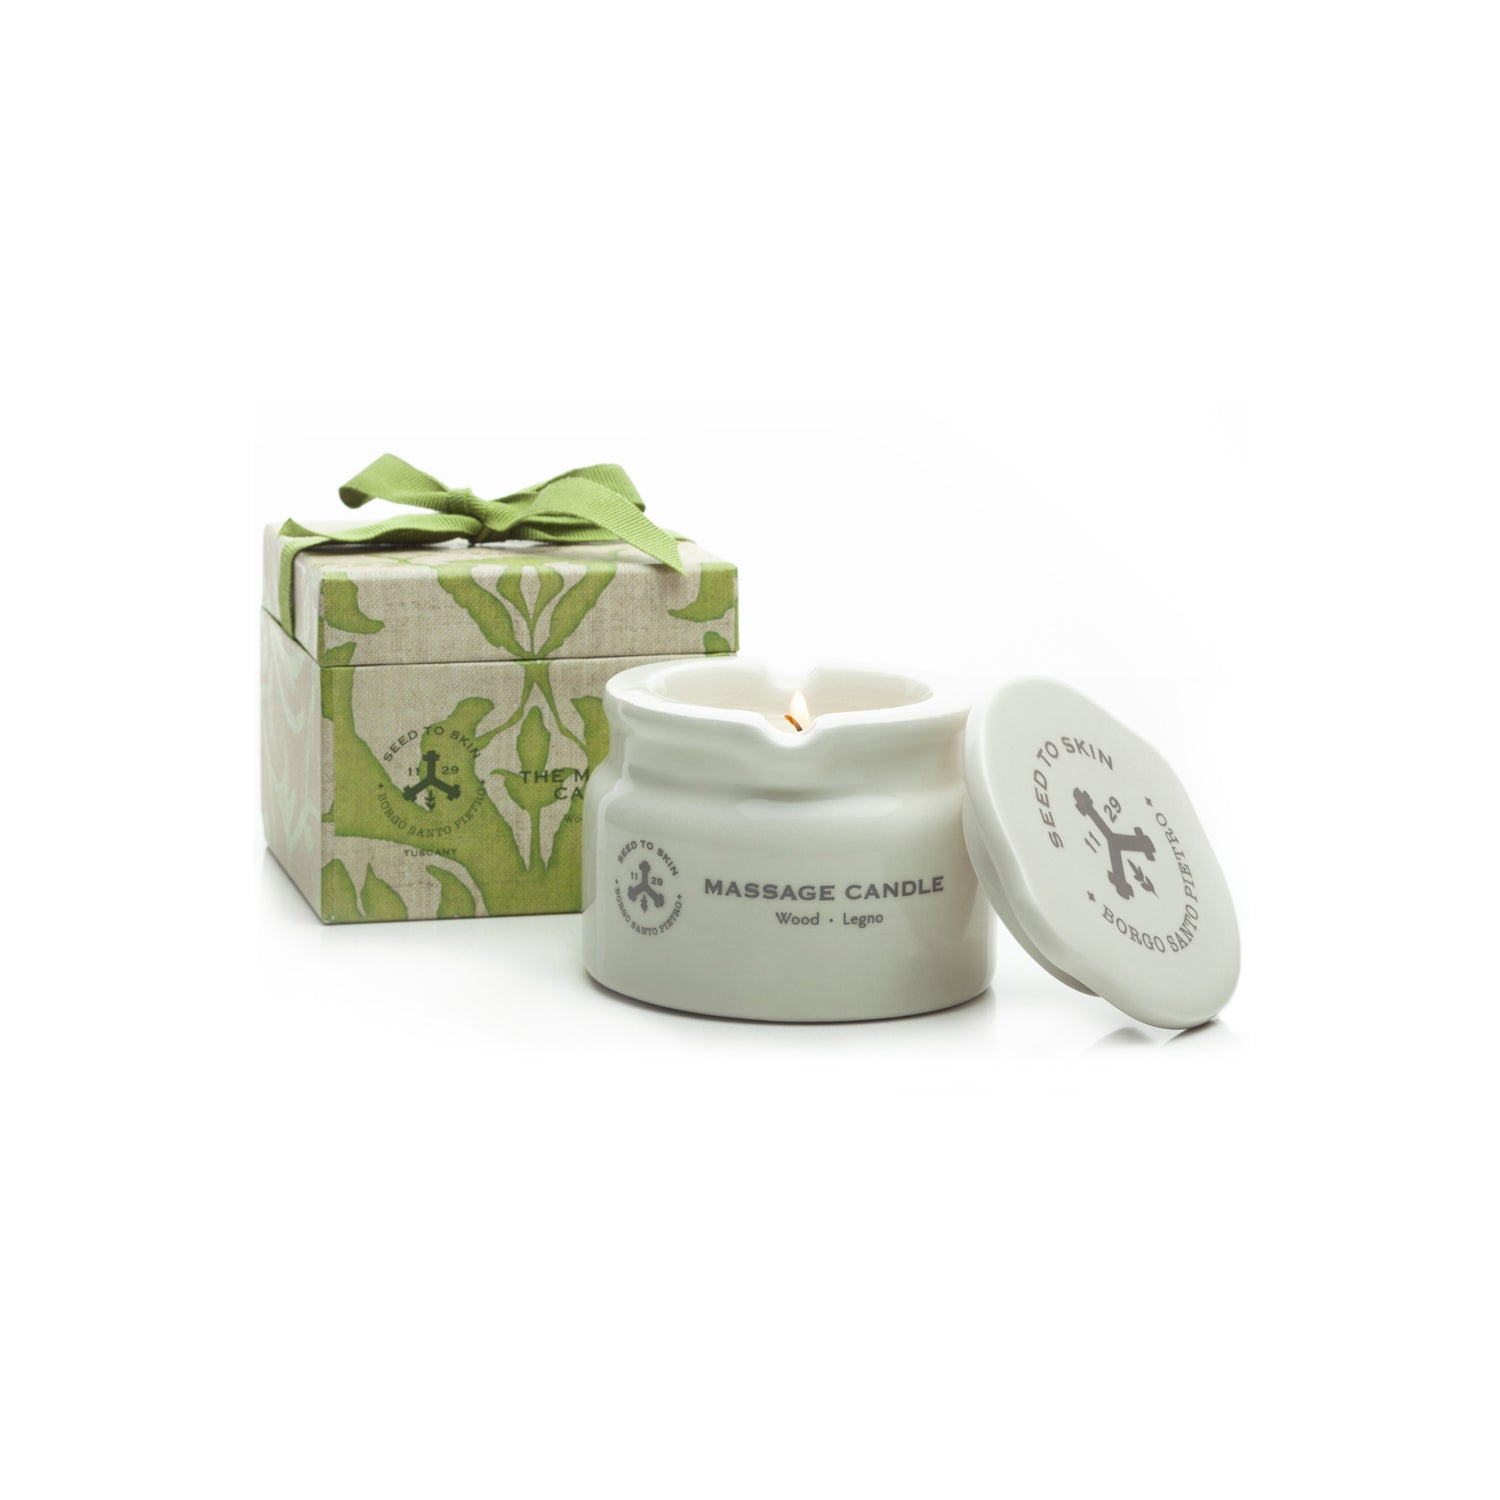 SEED TO SKIN TUSCANY The Massage Candle